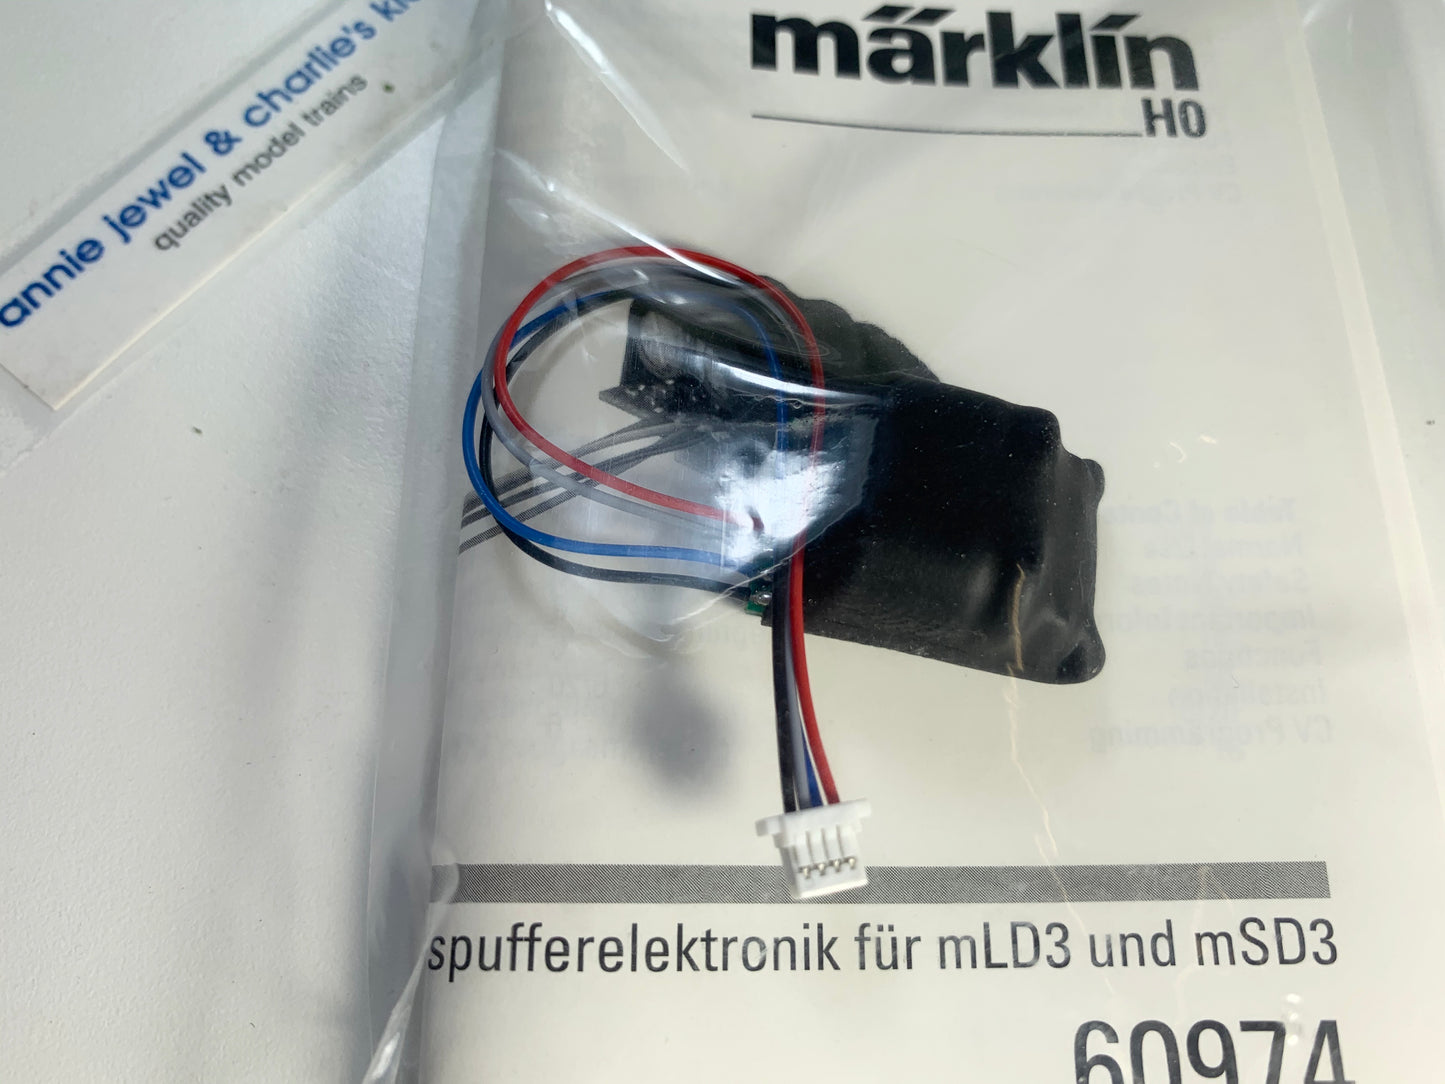 Marklin 60974 - Buffer Capacitor with Built-In Load Circuit for mLD3 and mSD3